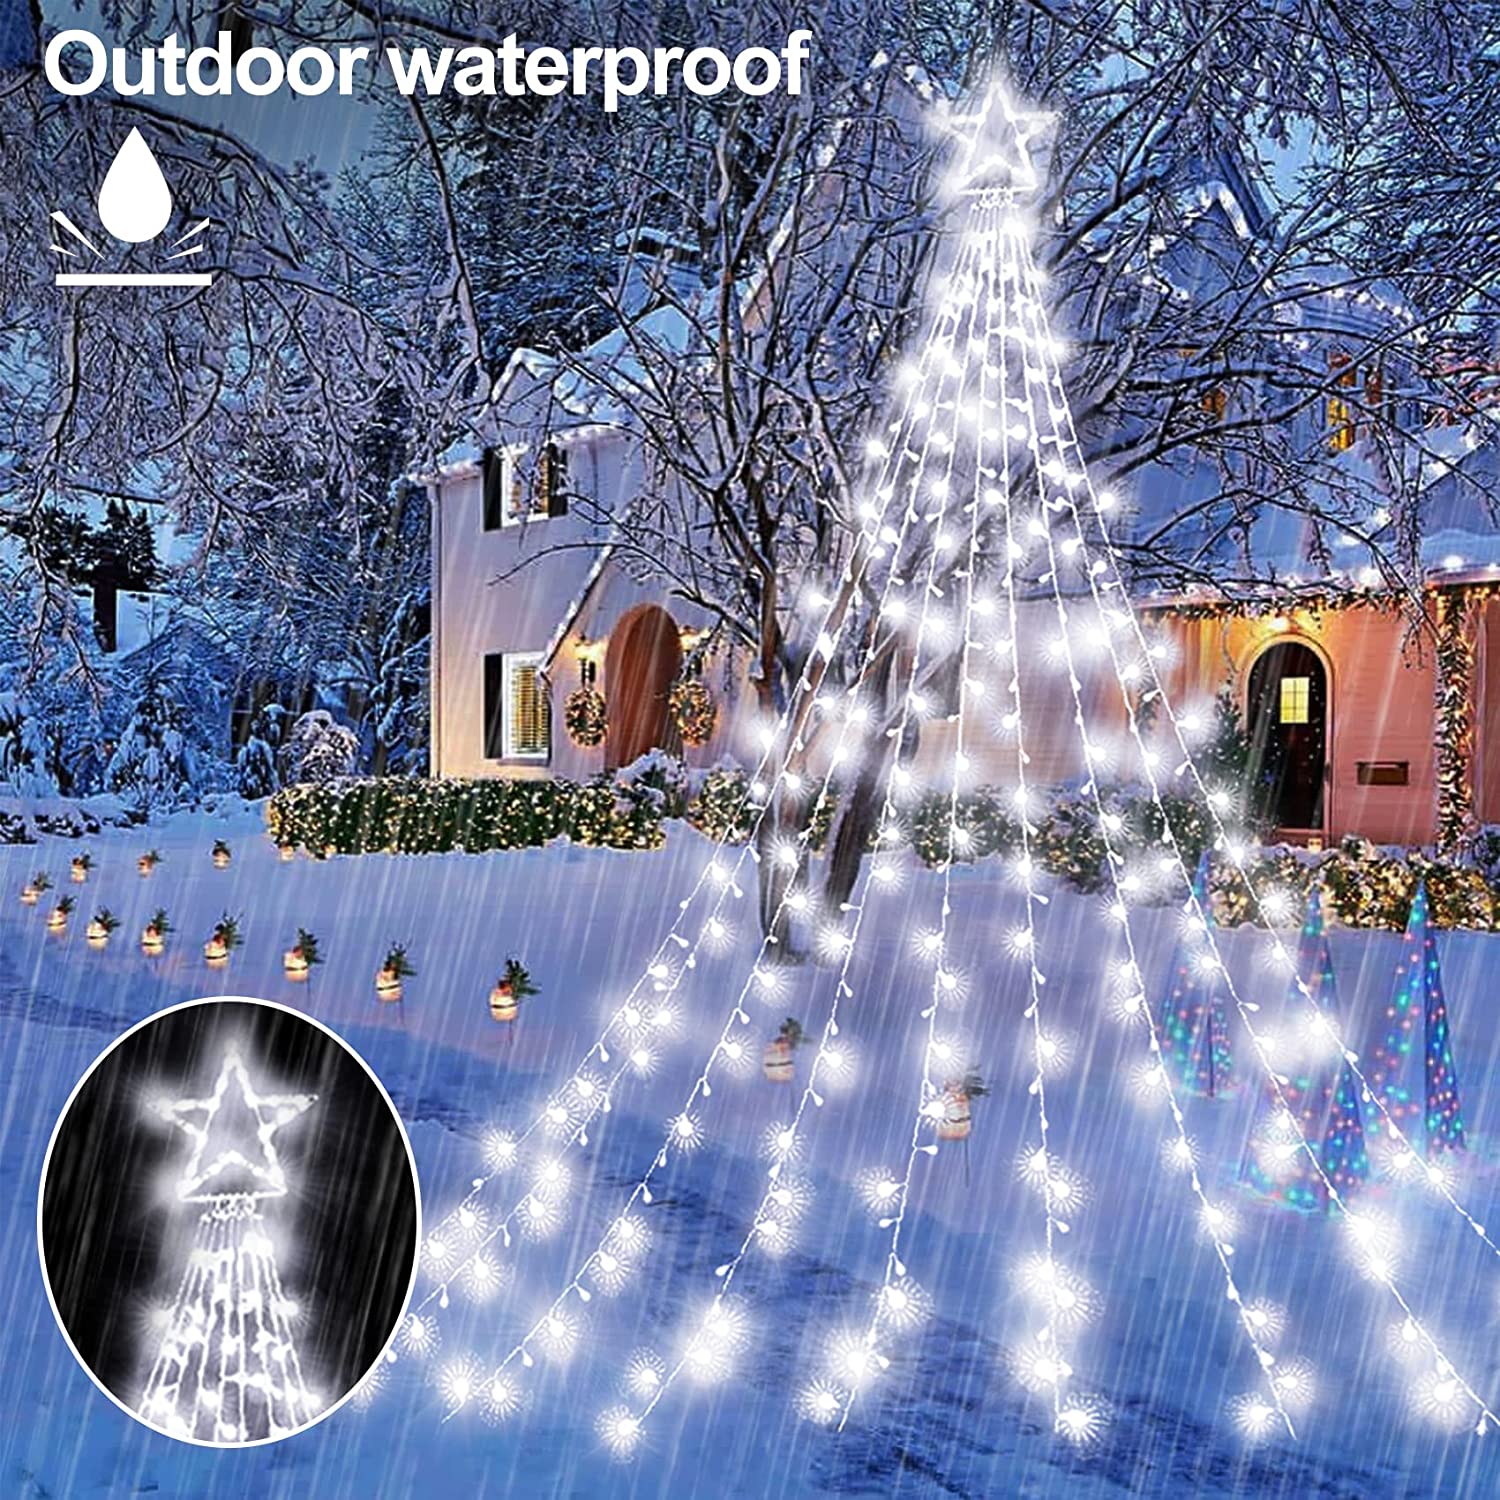 Outdoor Christmas Decorations Star Light,11.8 ft 344 LED Waterfall Tree Lights with Topper Star String Lights Plug in ,8 Lighting Mode Christmas Star Lights for Party Home Holiday Decor(Cool White)